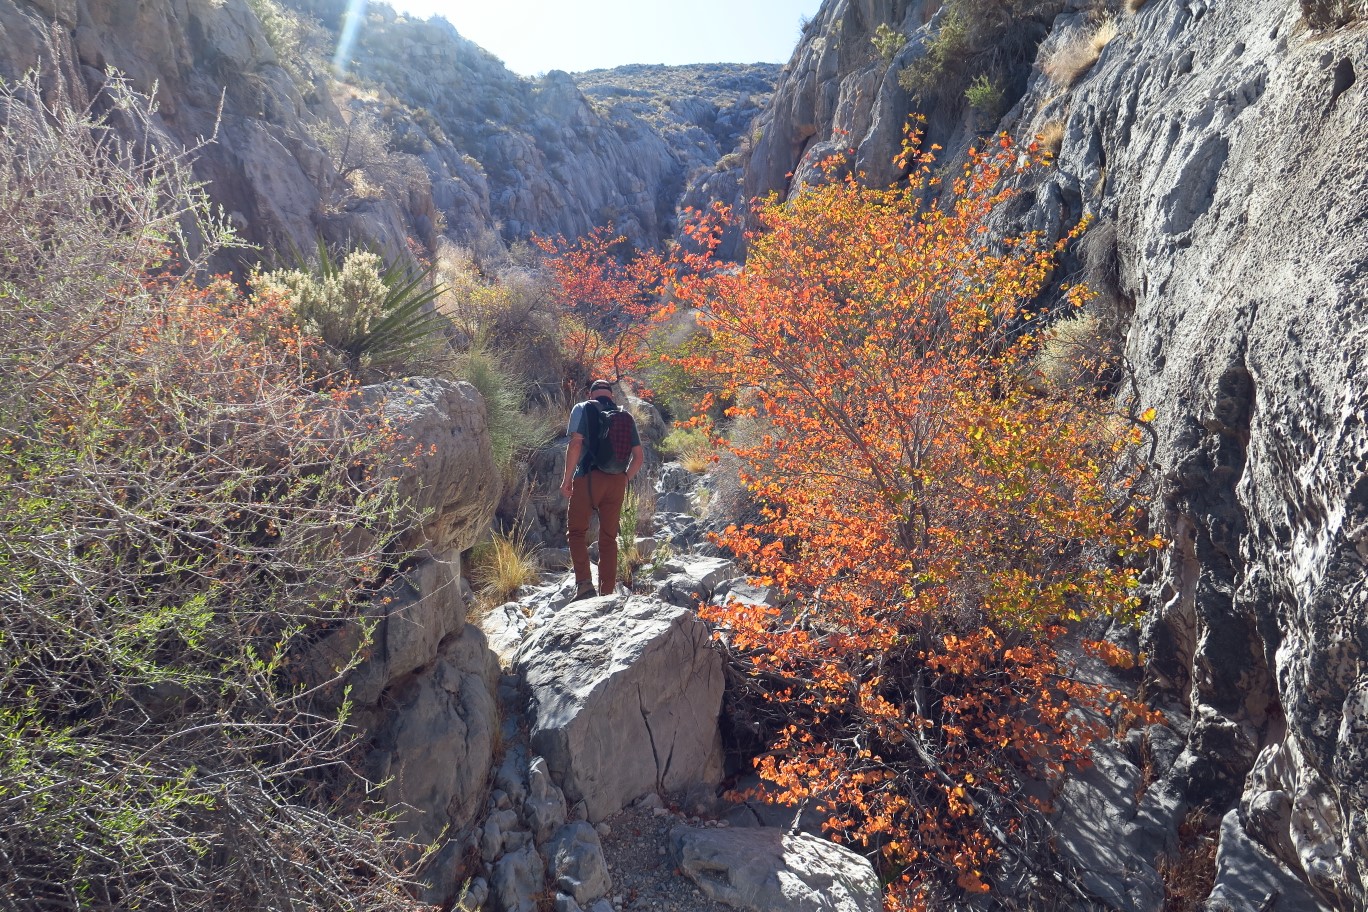 13-pretty_scenery_in_Trench_Canyon,great_fall_colors